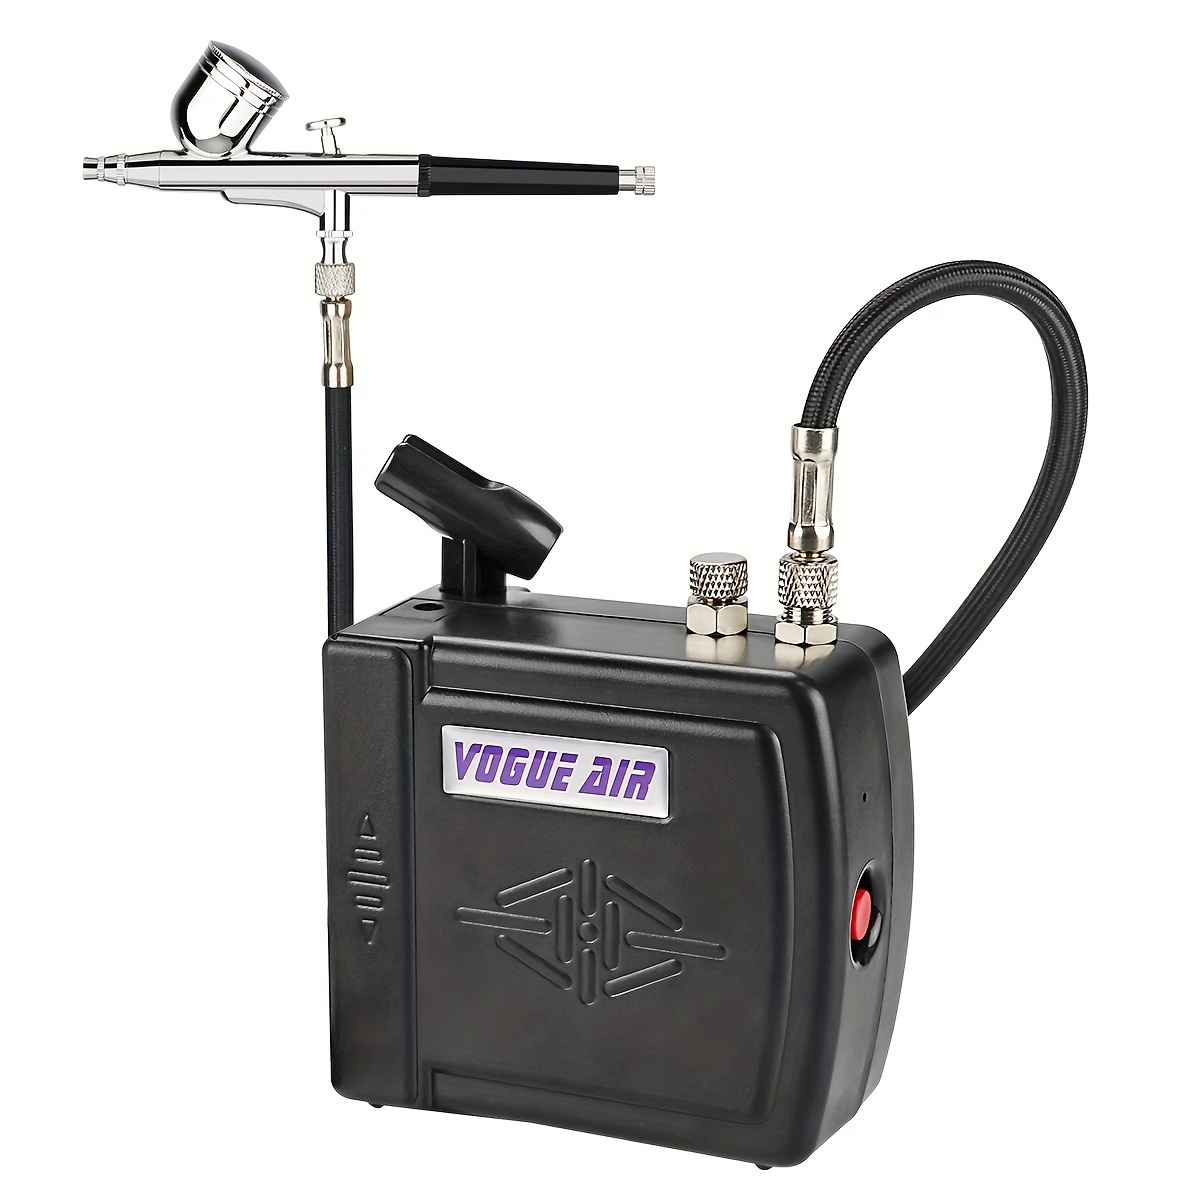 Dual Action Airbrush Kit with 3 Airbrushes and Compressor